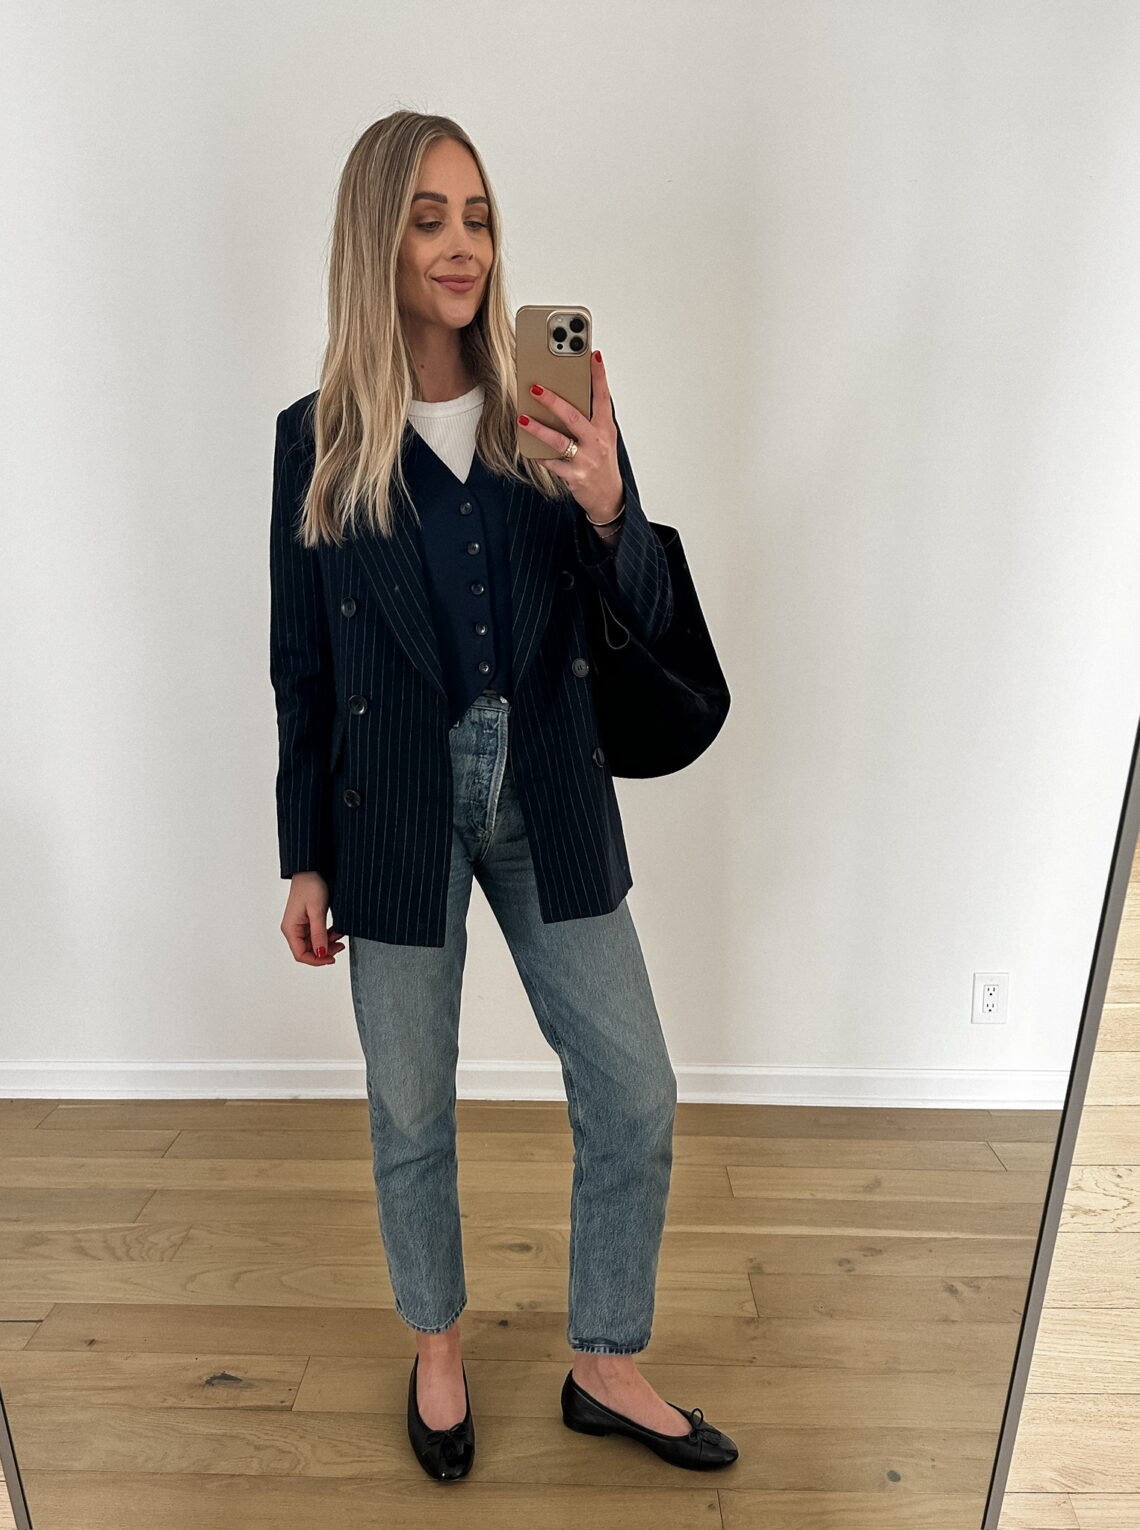 Fashion Jackson wearing MAYSON the label navy pinstripe blazer (small), MAYSON the label navy vest (small), white tank (small) AGOLDE jeans (tts), Daily outfit idea, casual workwear